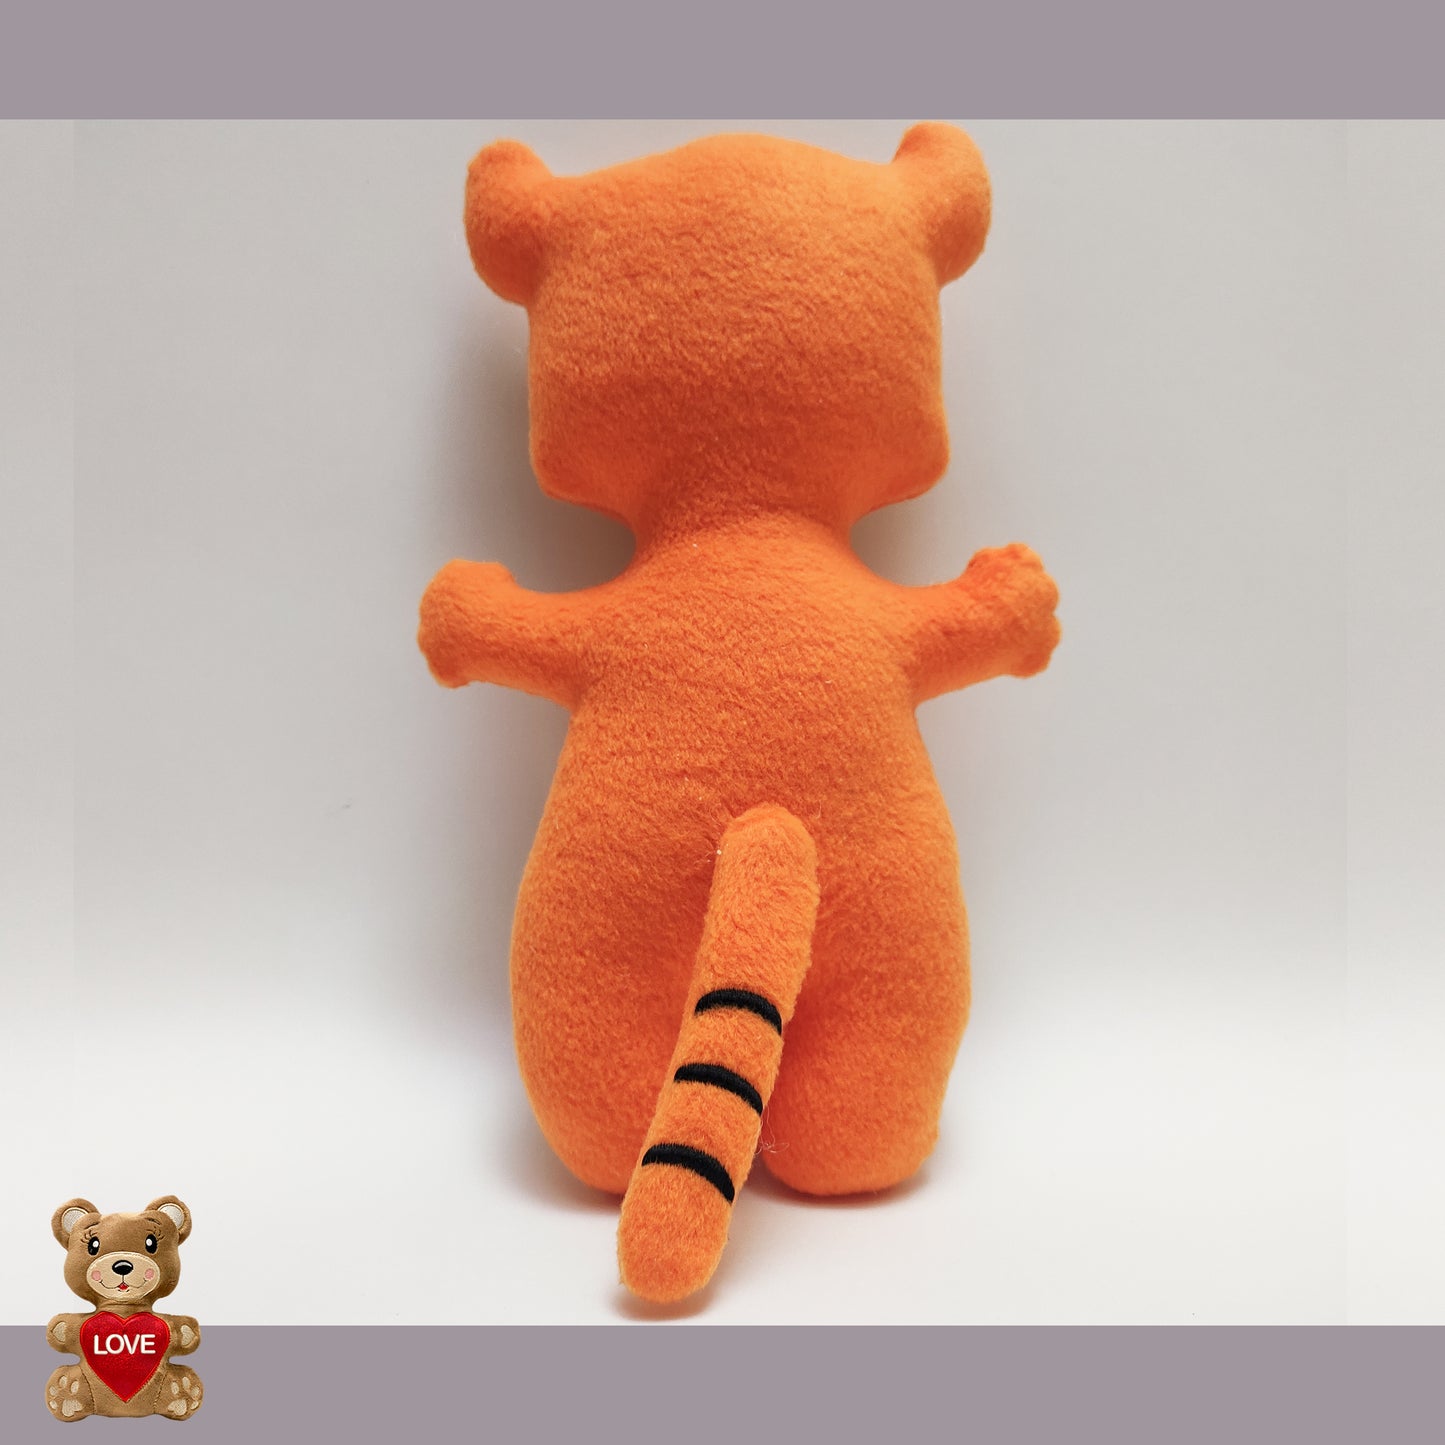 Personalised embroidery Plush Soft Toy Tiger ,Super cute personalised soft plush toy, Personalised Gift, Unique Personalized Birthday Gifts , Custom Gifts For Children